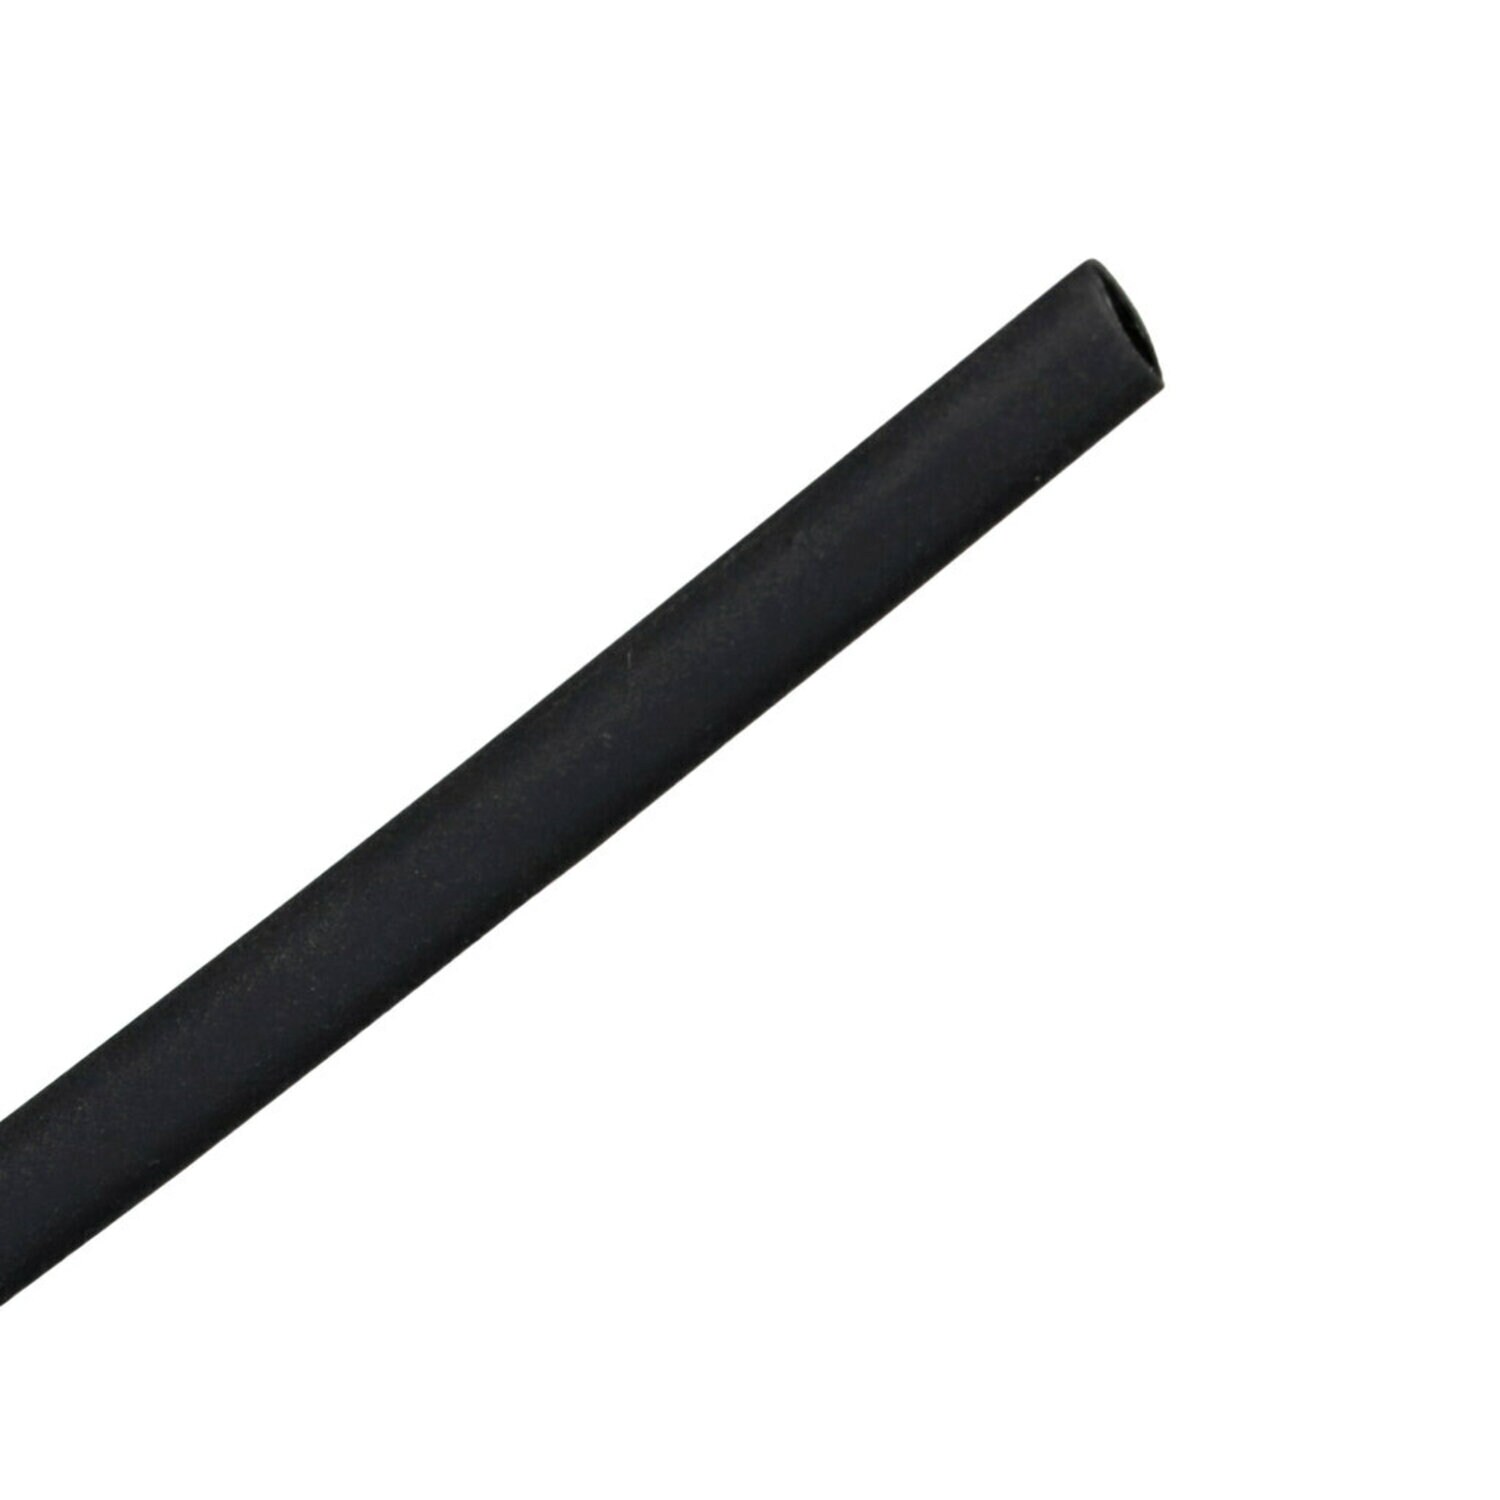 7000133593 - 3M Thin-Wall Heat Shrink Tubing EPS-300, Adhesive-Lined,
1/8-48"-Black-25 Pcs, 48 in length sticks, 25 pieces/case